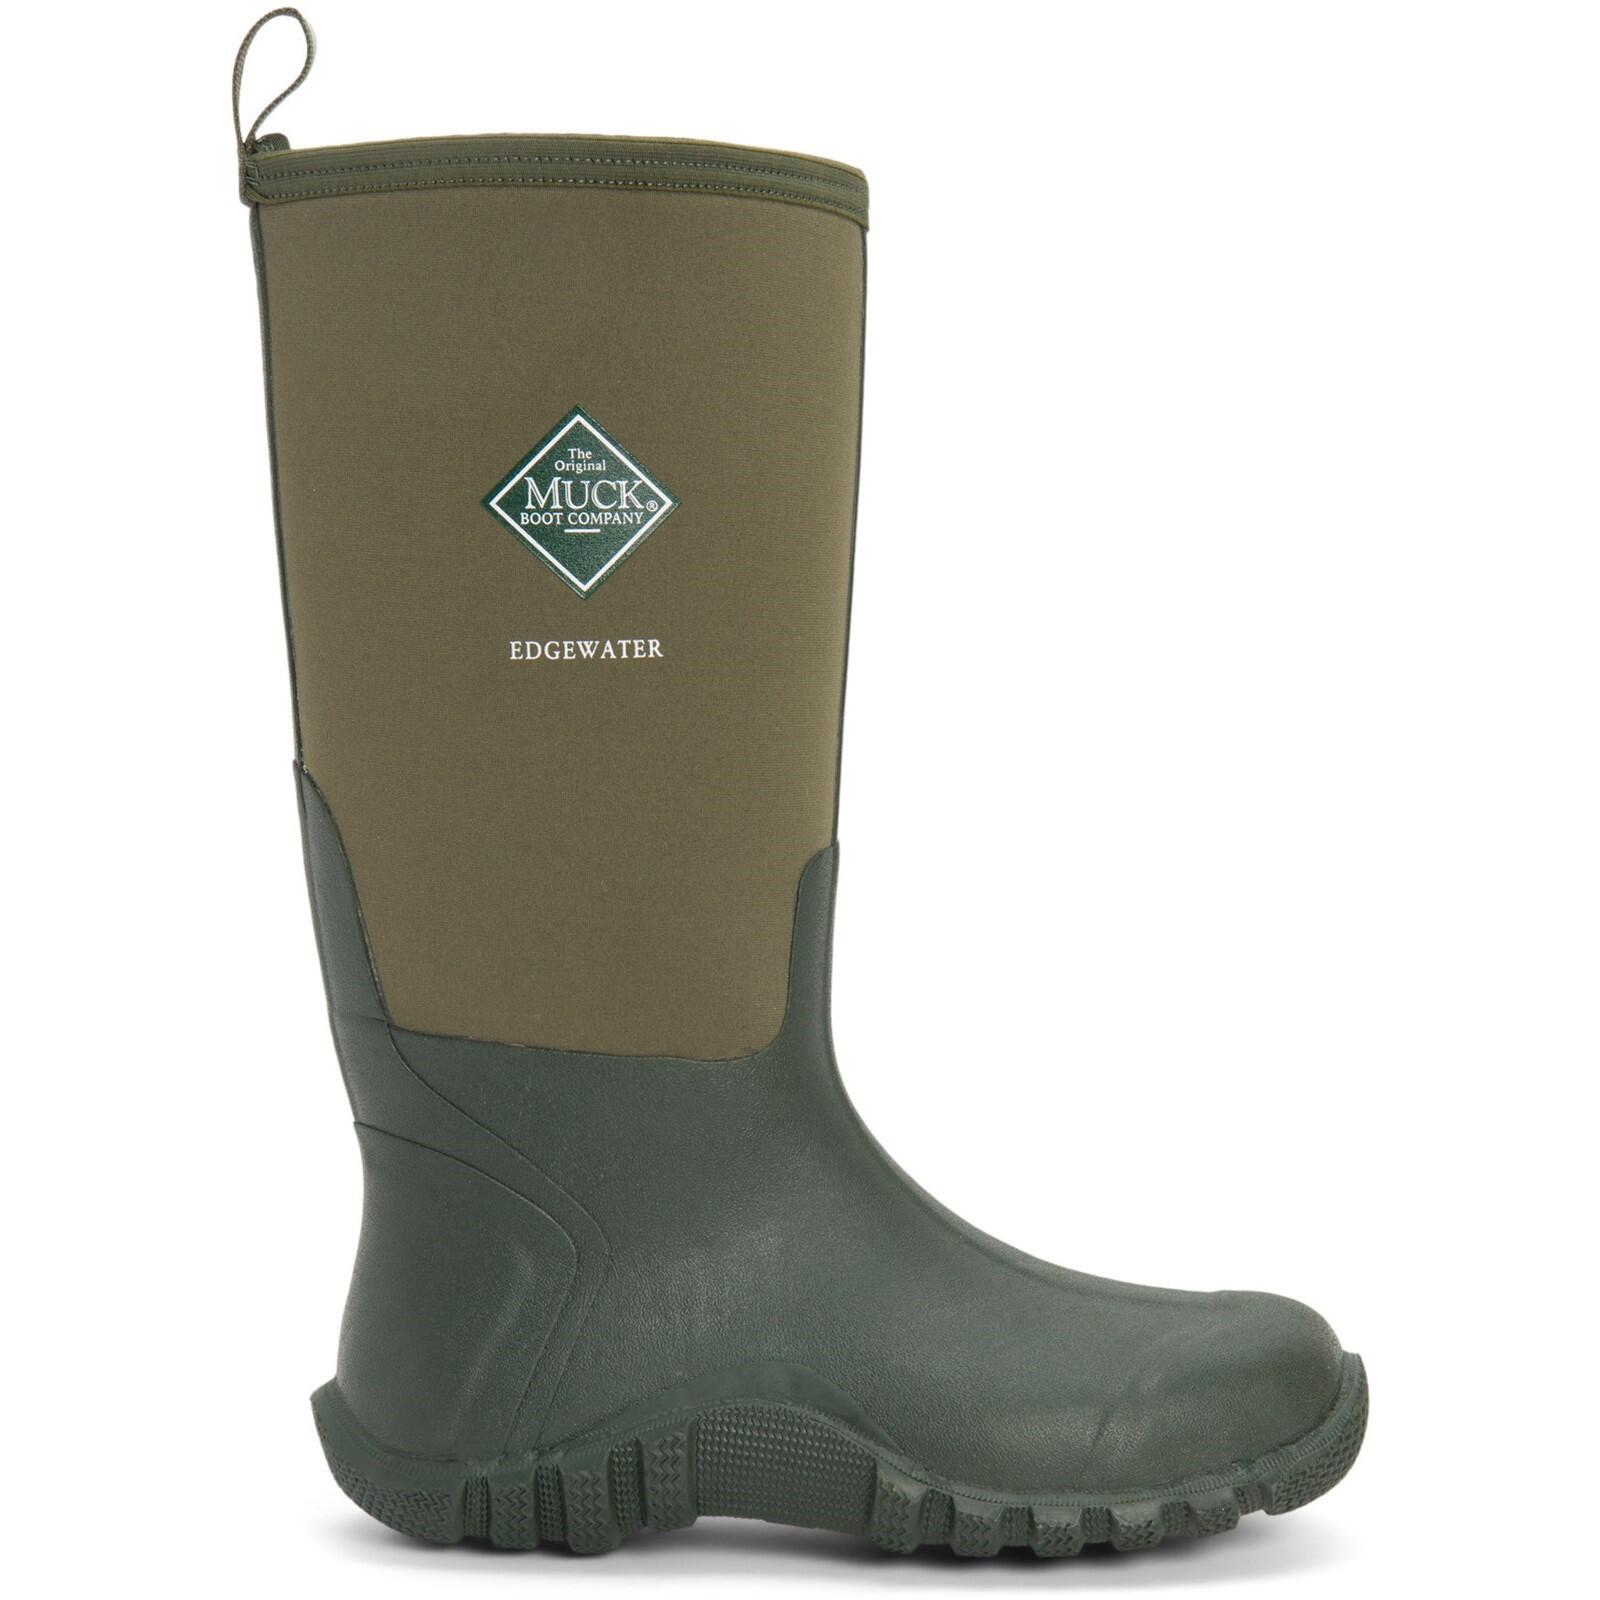 MUCK BOOTS Edgewater Hi Textile/Weather Wellingtons GREEN